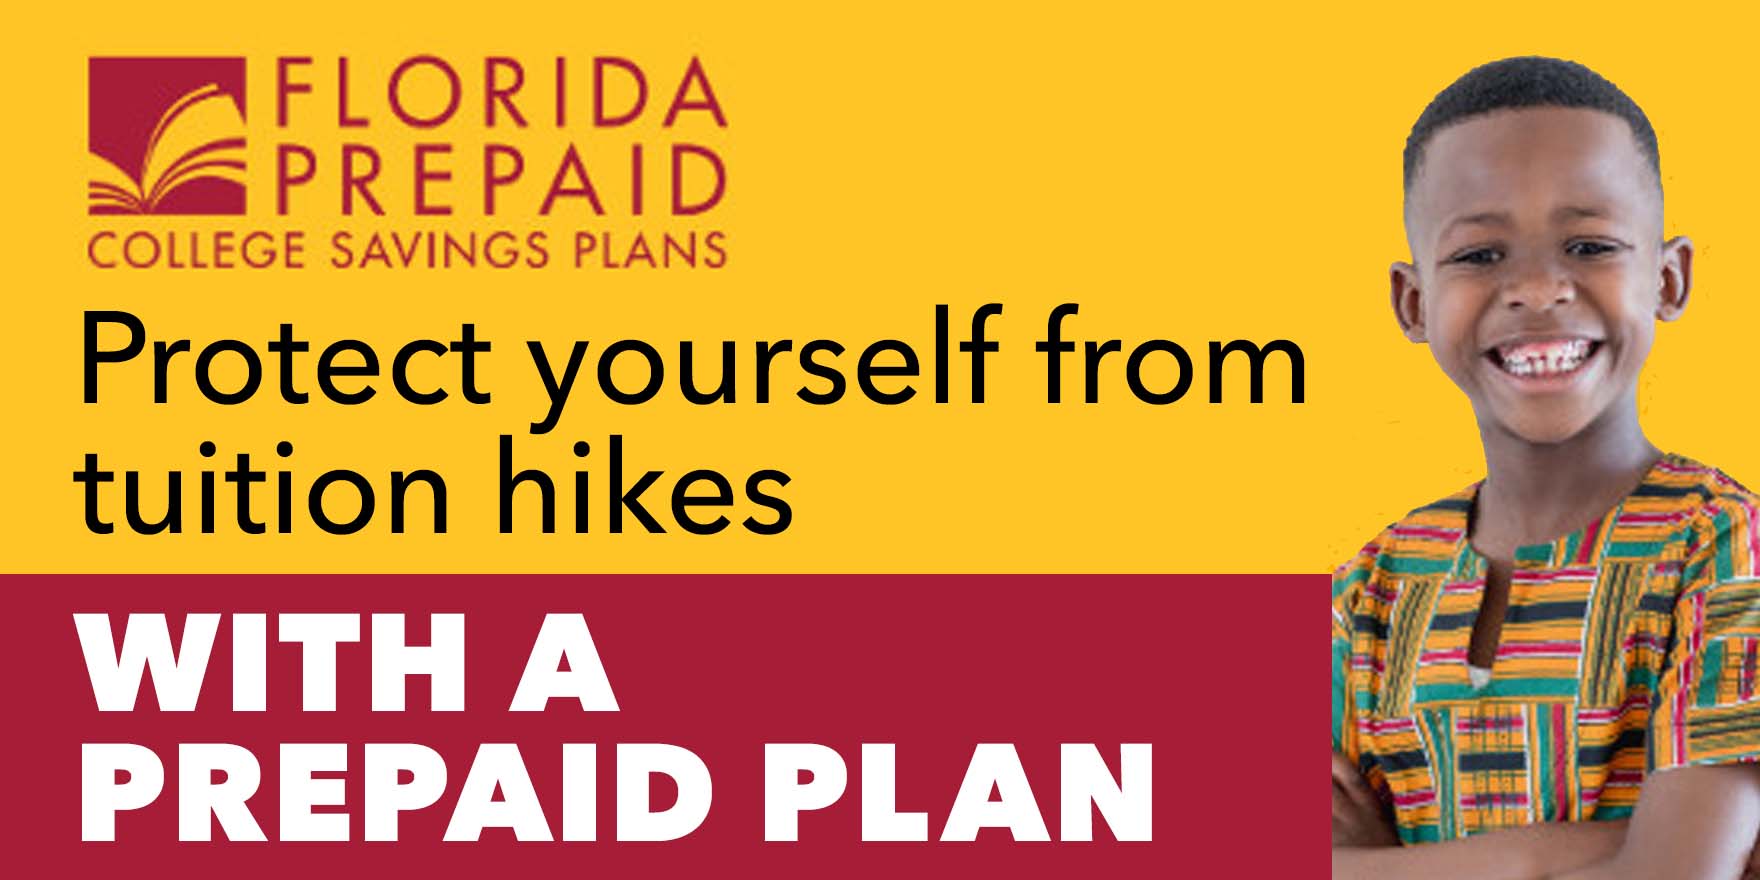 Protect yourself from tuition hikes with a prepaid plan